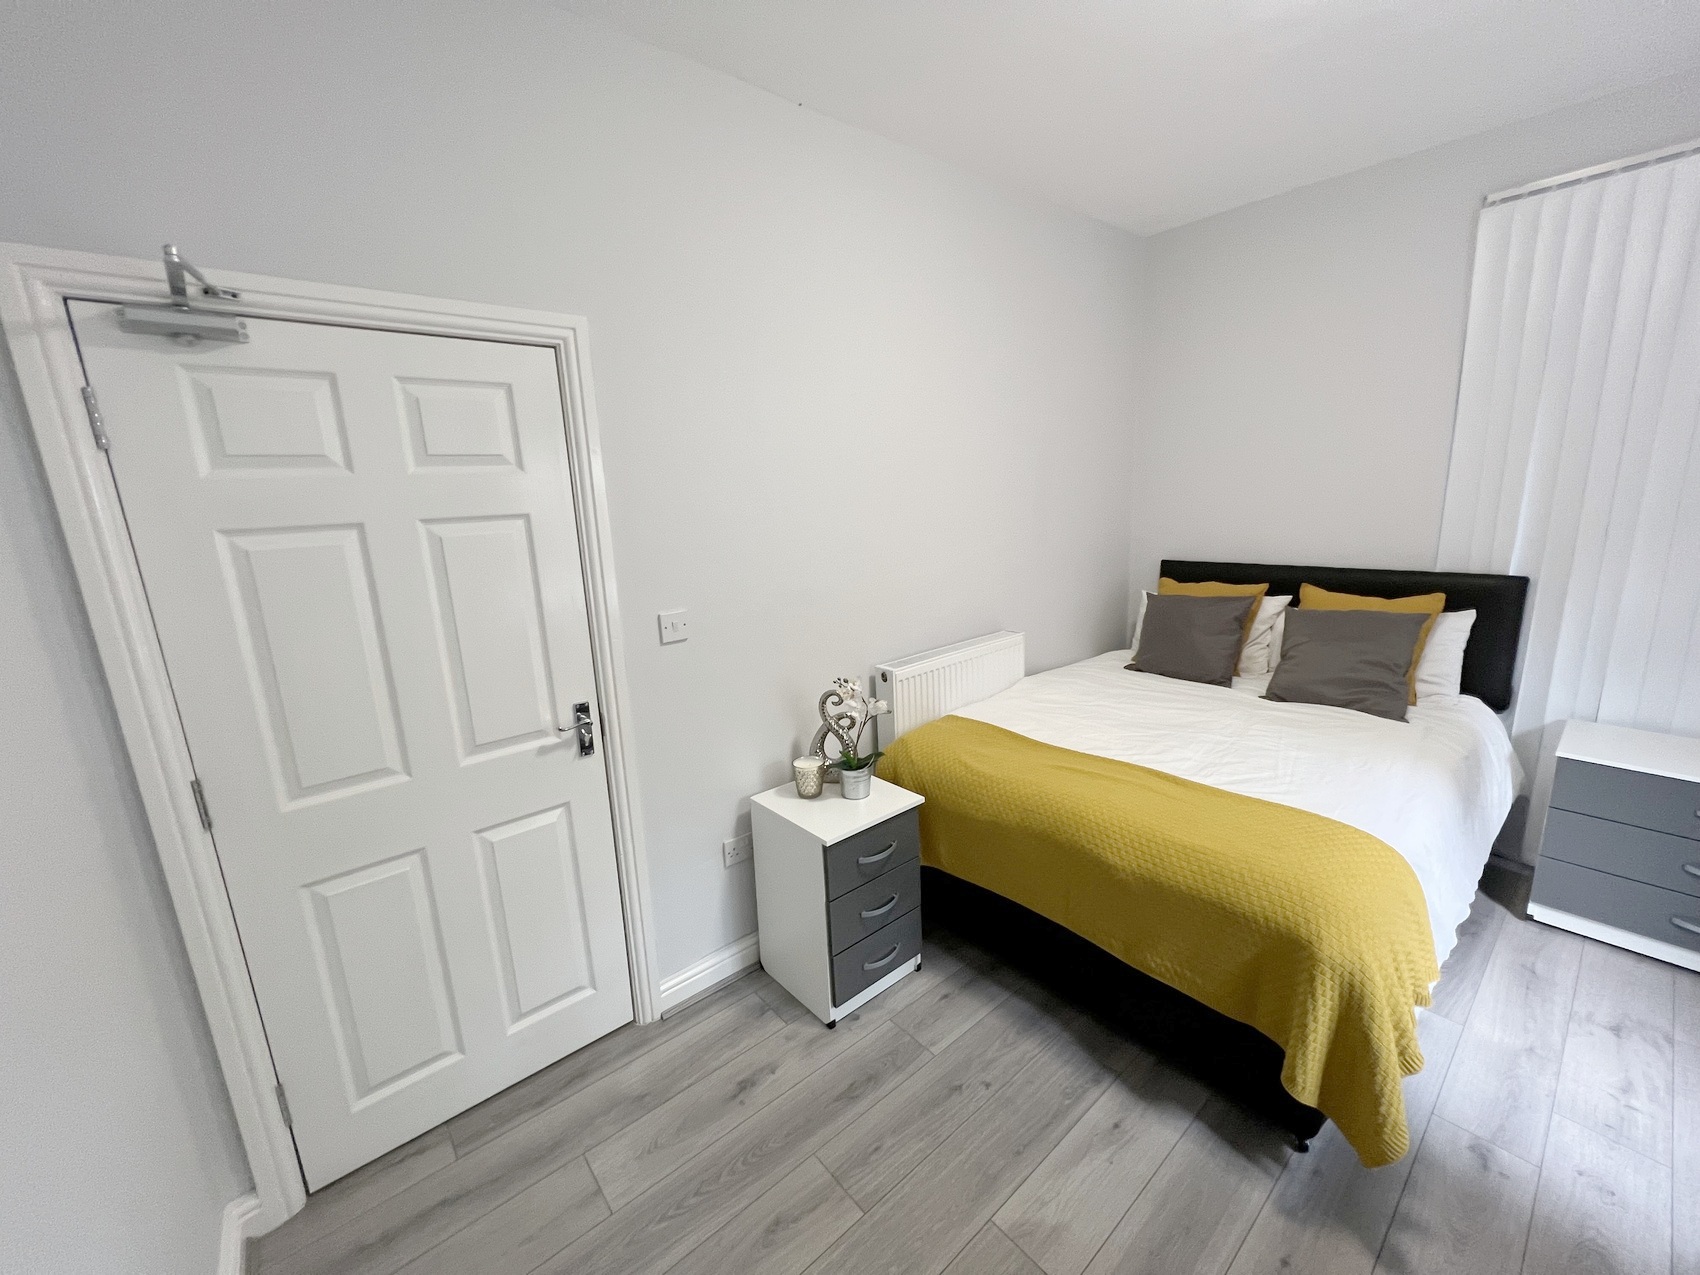 Luxurious Brand NEW Rooms Near Moseley Village! – Room 2